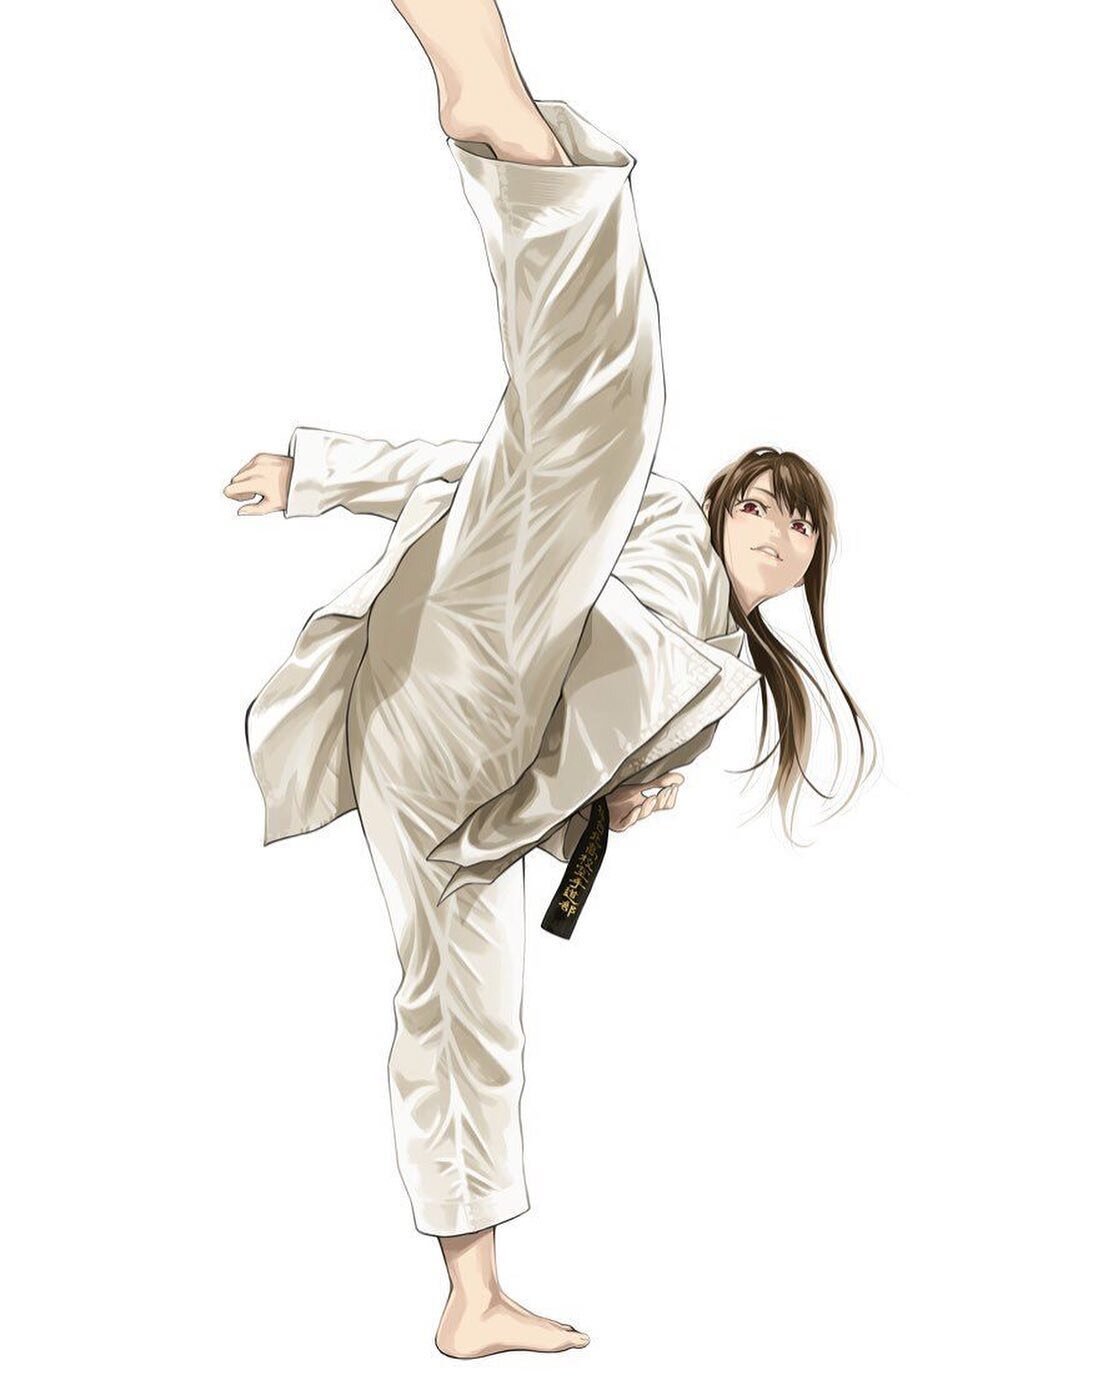 Women Wanted! Mothers, daughters, sisters LETS GO!! Karate for MIND, BODY and SPIRIT. Karate for ALL! Osu! 

PM me for trial info! Only $9.99 for 1 week! #kyokushin #karate #womenempowerment #selfdefenseforwomen